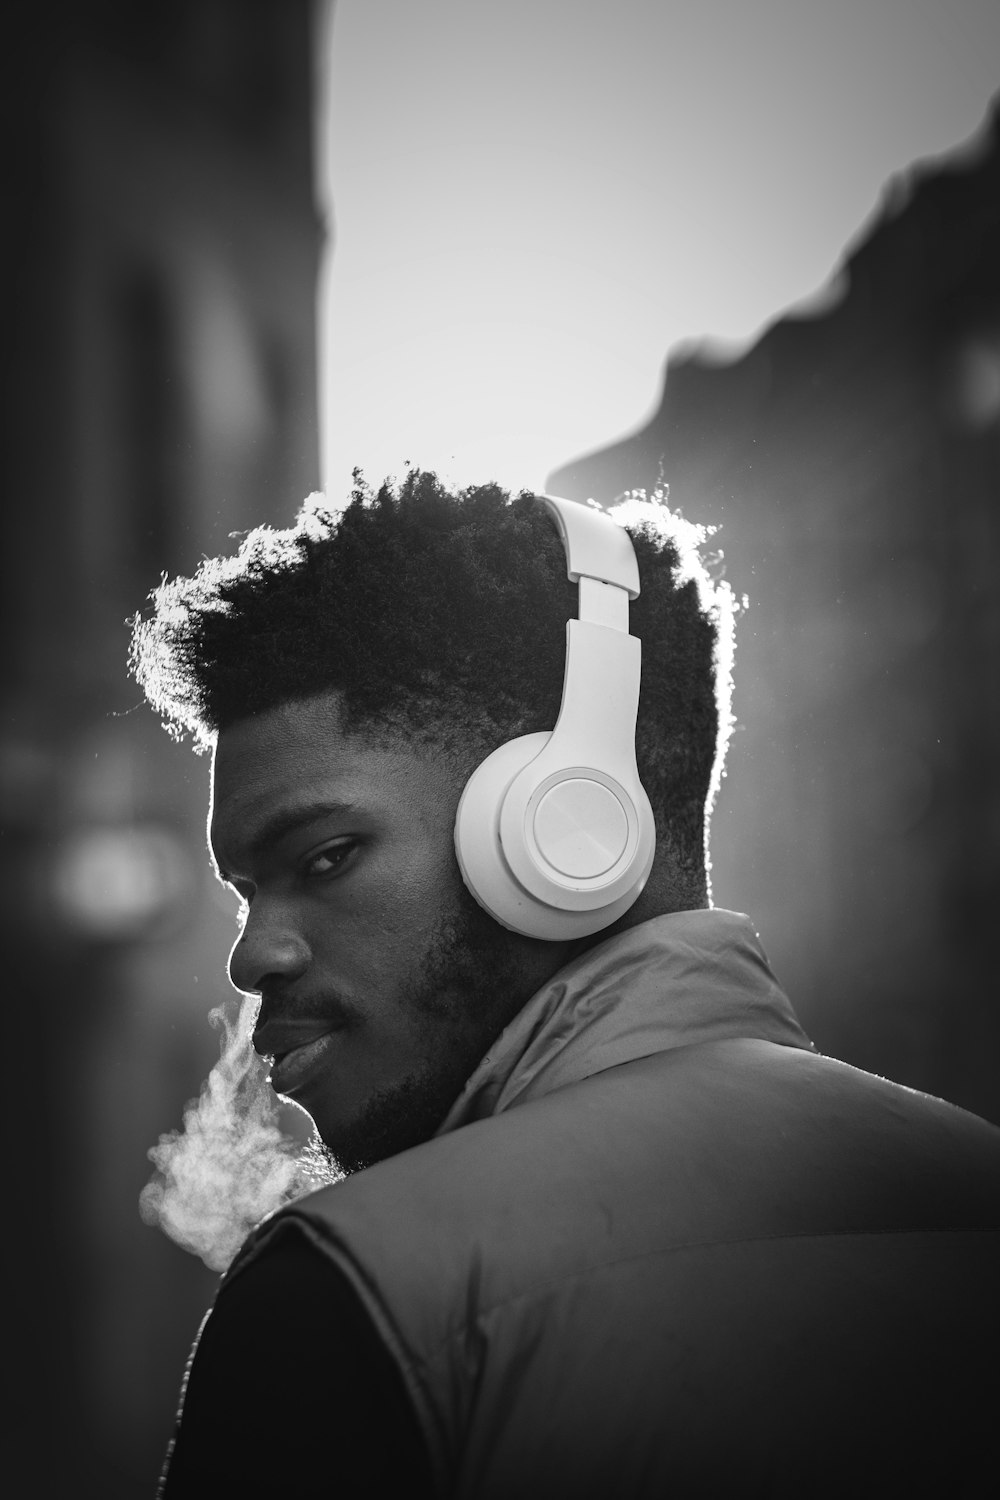 a man with headphones on smoking a cigarette